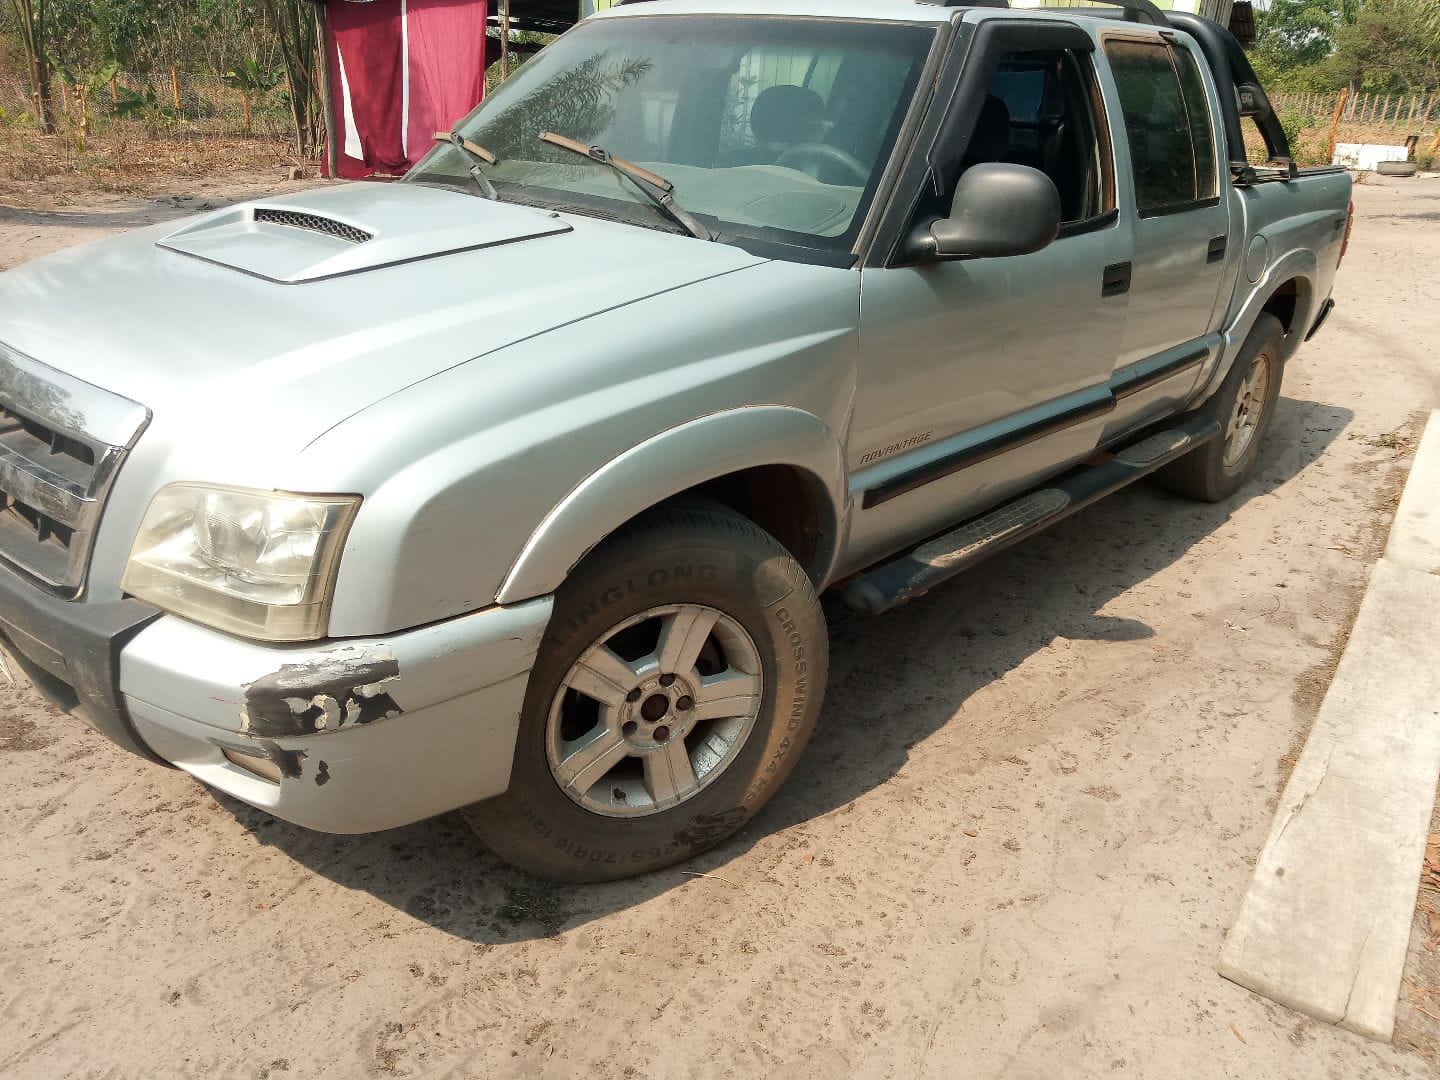 In Vilhena, farmers fall into a coup and lose a truck valued at R$ 45,000 thumbnail